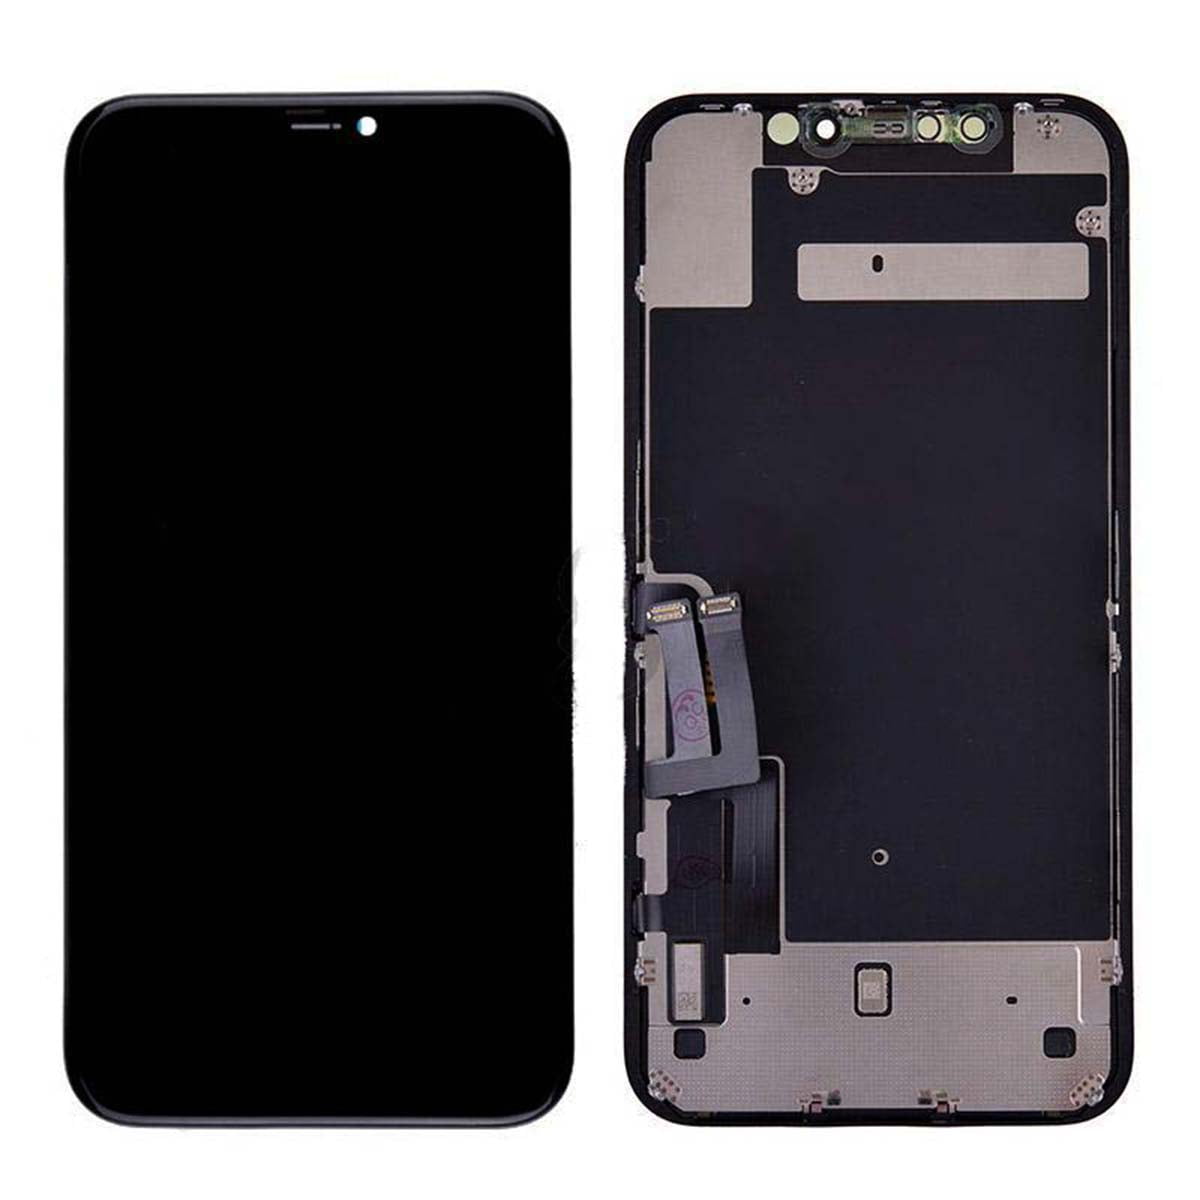 EFAITHFIX for iPhone 11 LCD Screen Replacement 6.1 Inch Frame Assembly LCD  Display and 3D Touch Screen Digitizer with Repair Tools Kit for A2111